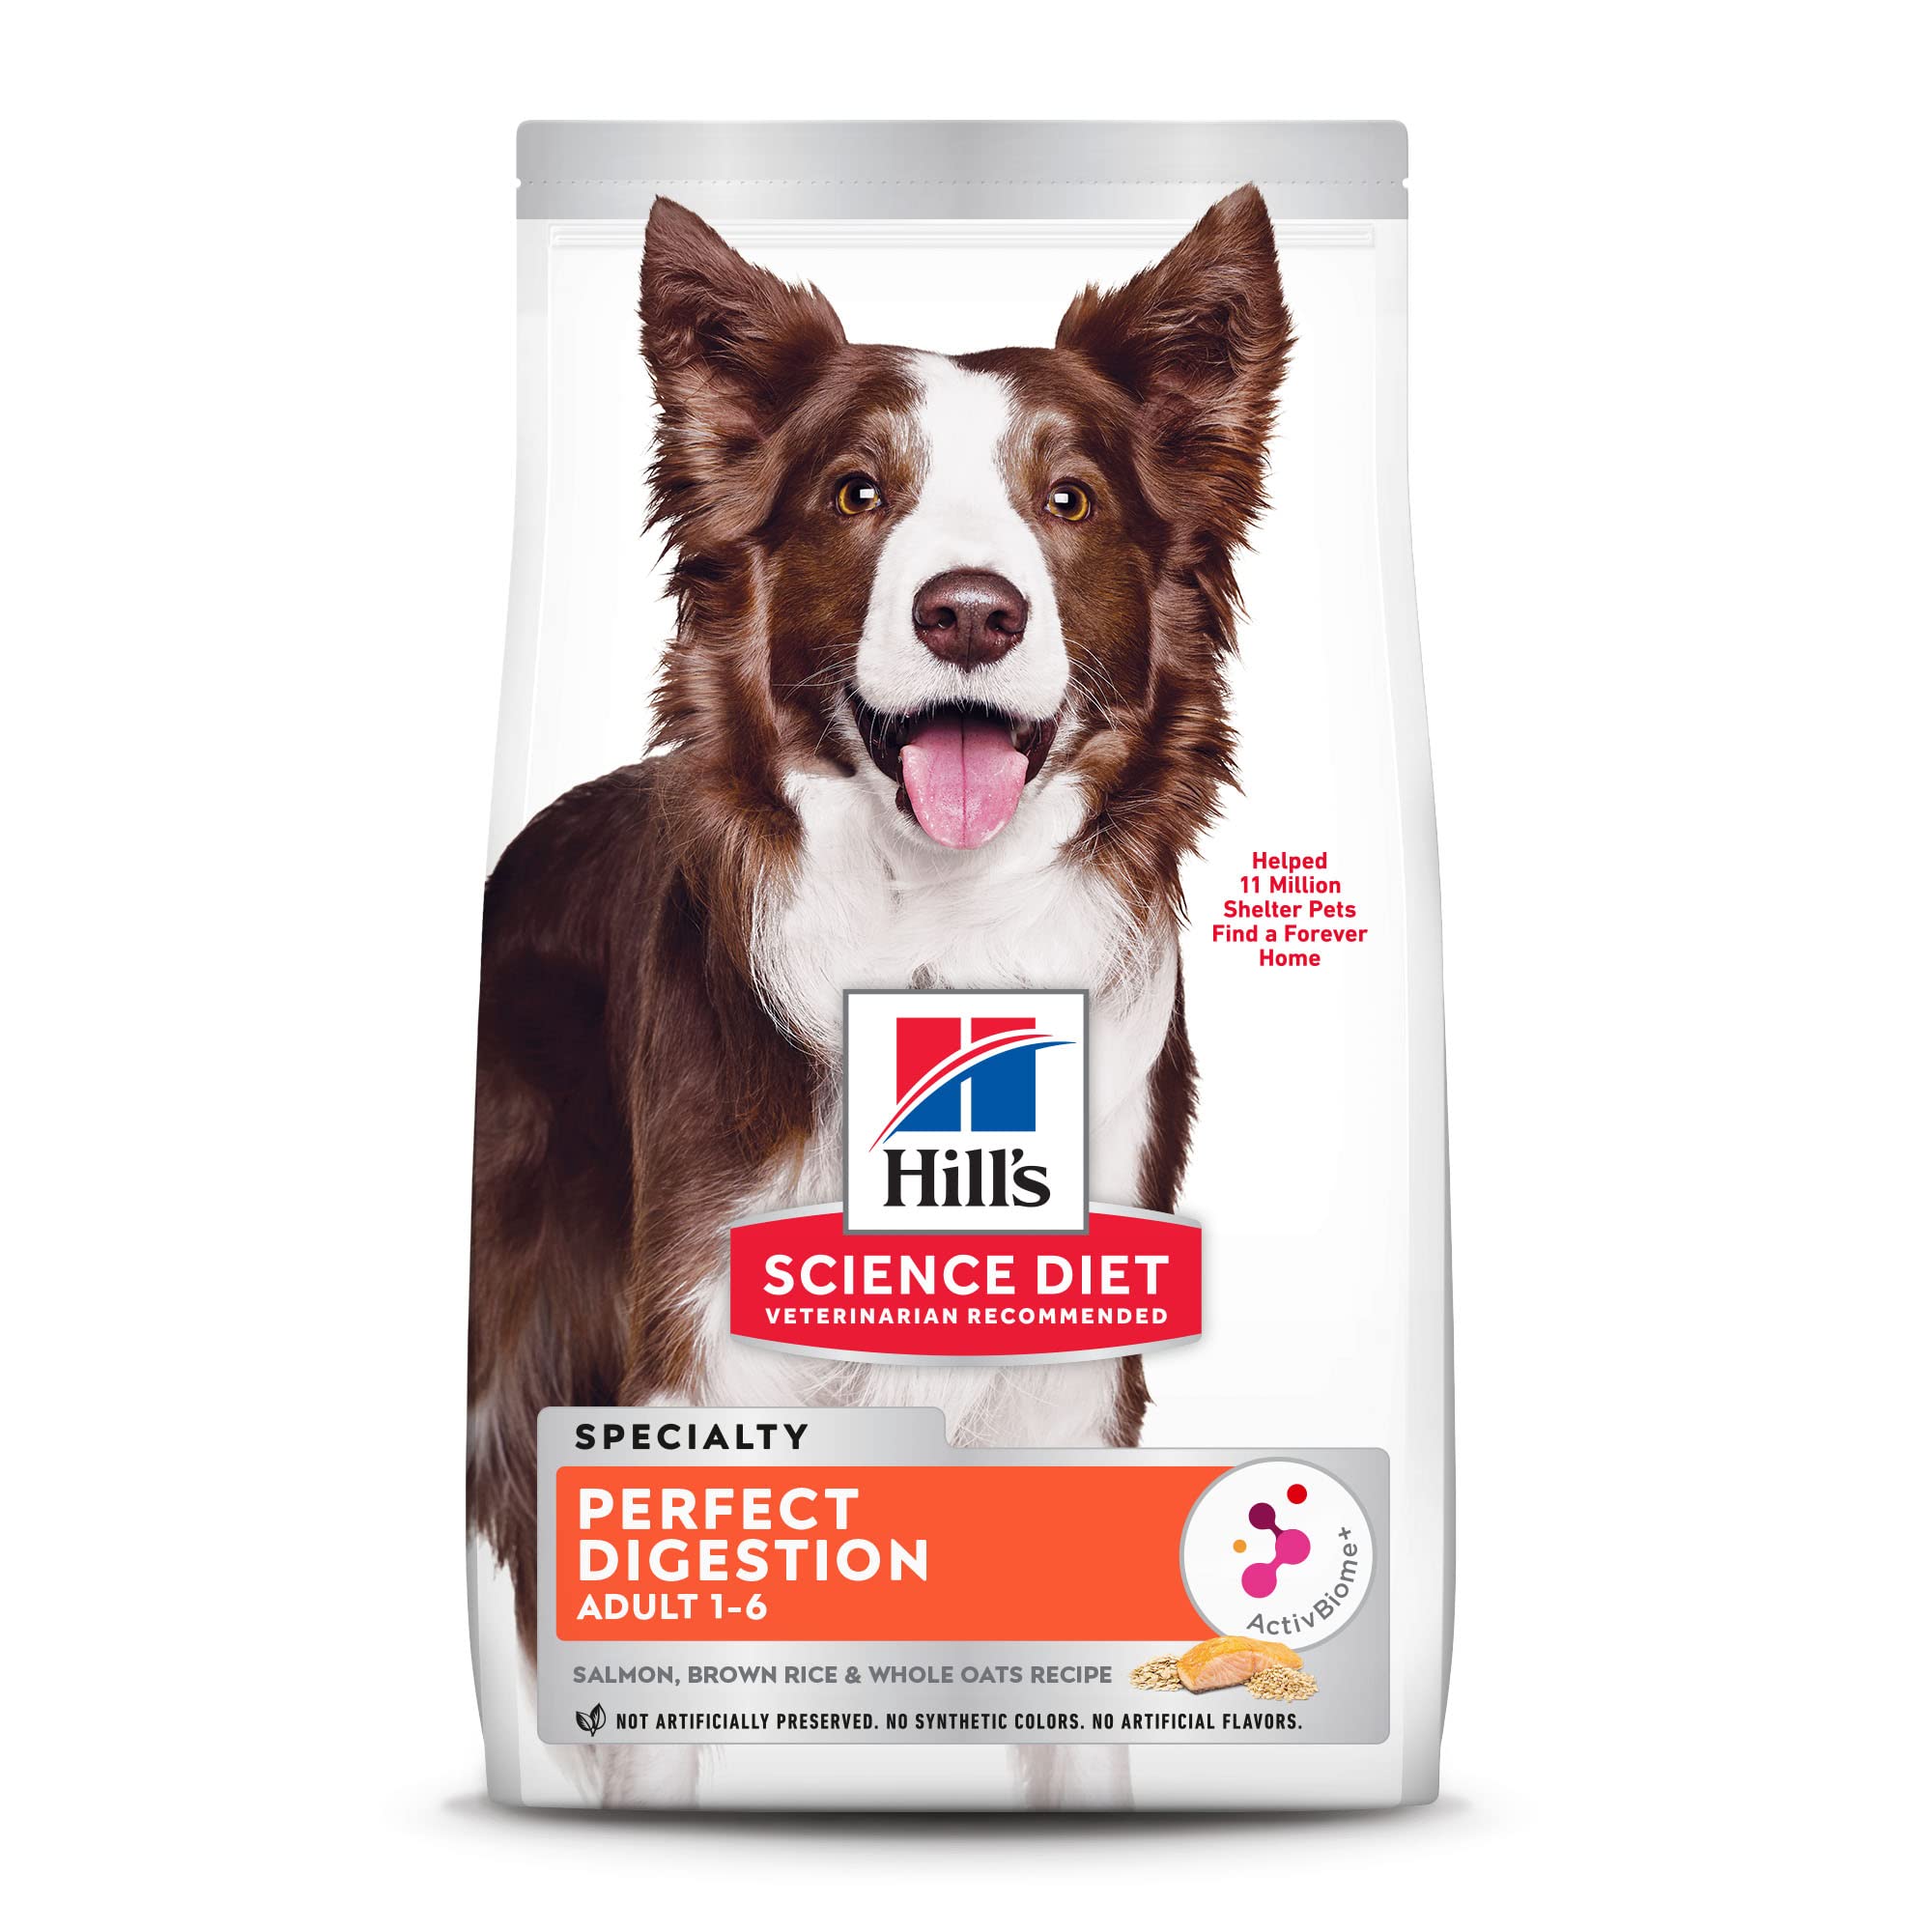 Hill's Science Diet Hills Science Diet Adult Dog Dry Food, Perfect Digestion, Salmon, Oats,  Rice Recipe, 35 lb Bag